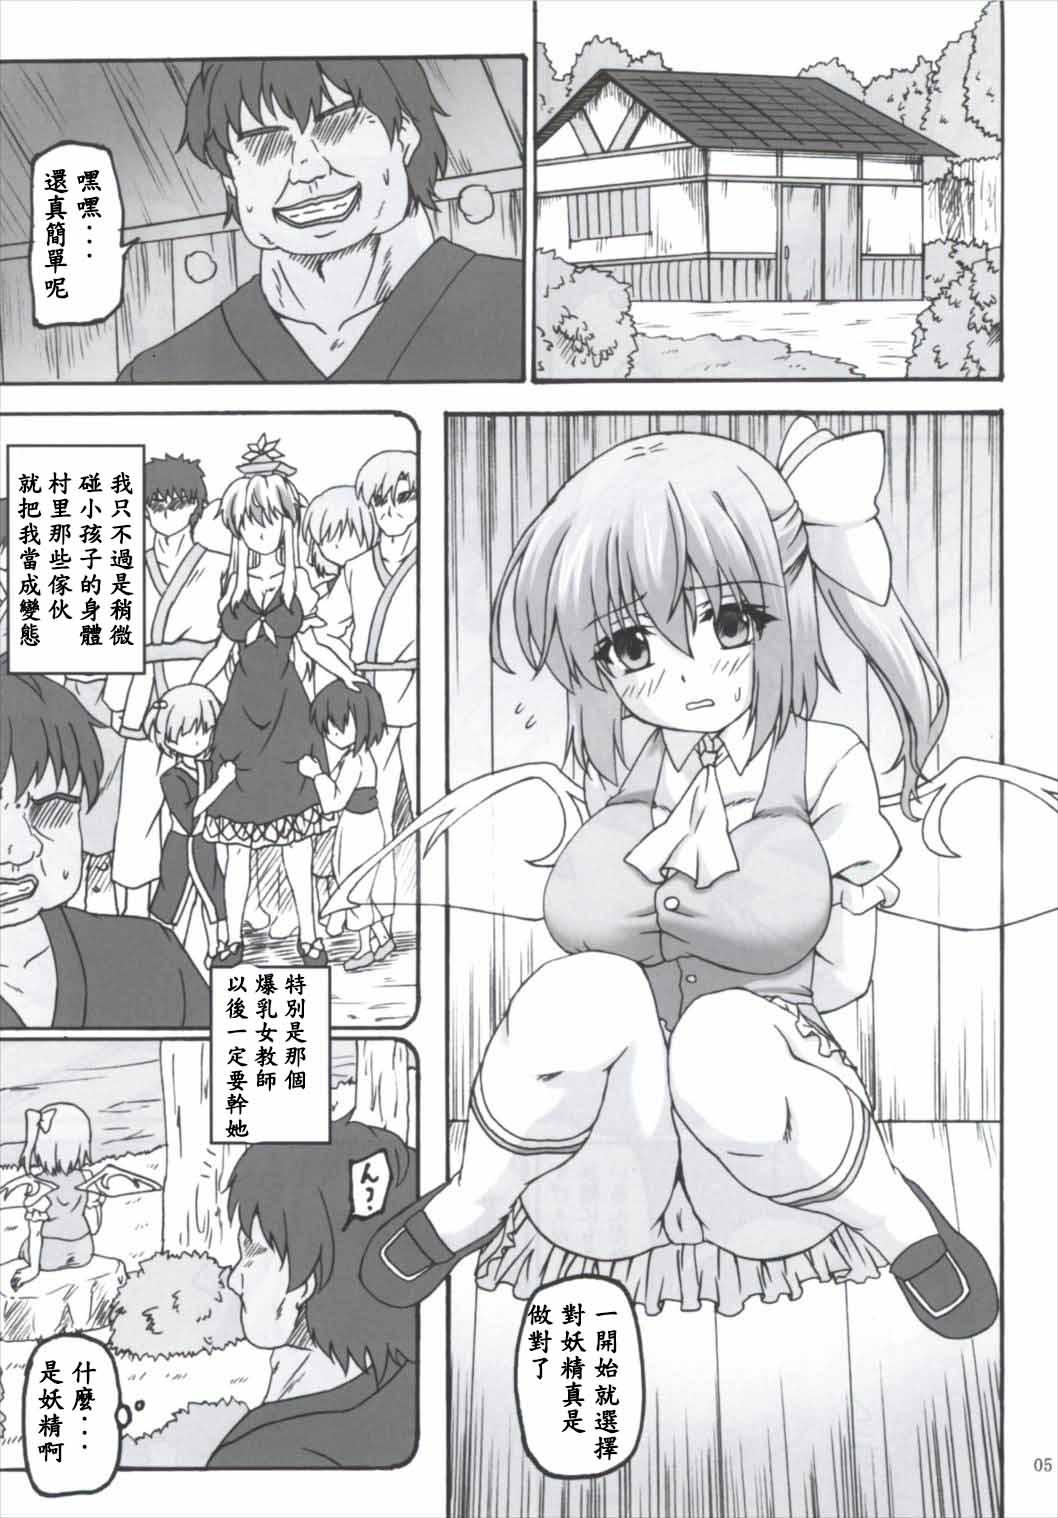 Shemale Porn Daiyousei Hyouhon - Touhou project Outdoors - Page 5